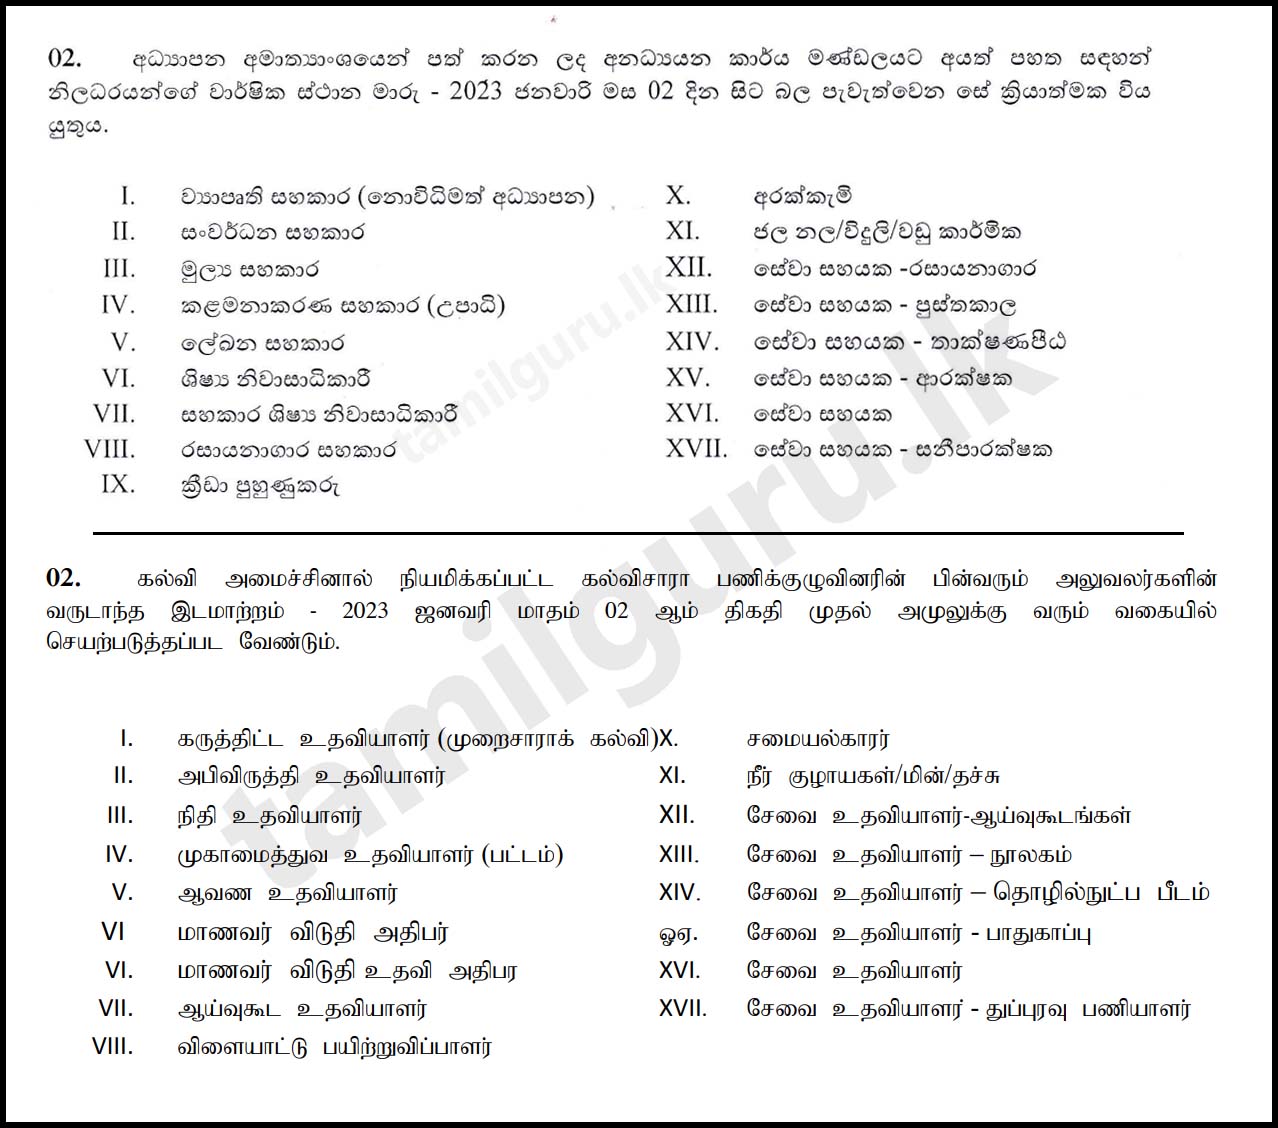 Annual Transfers of Non-Academic Staff Officers Appointed by the Ministry of Education - 2023